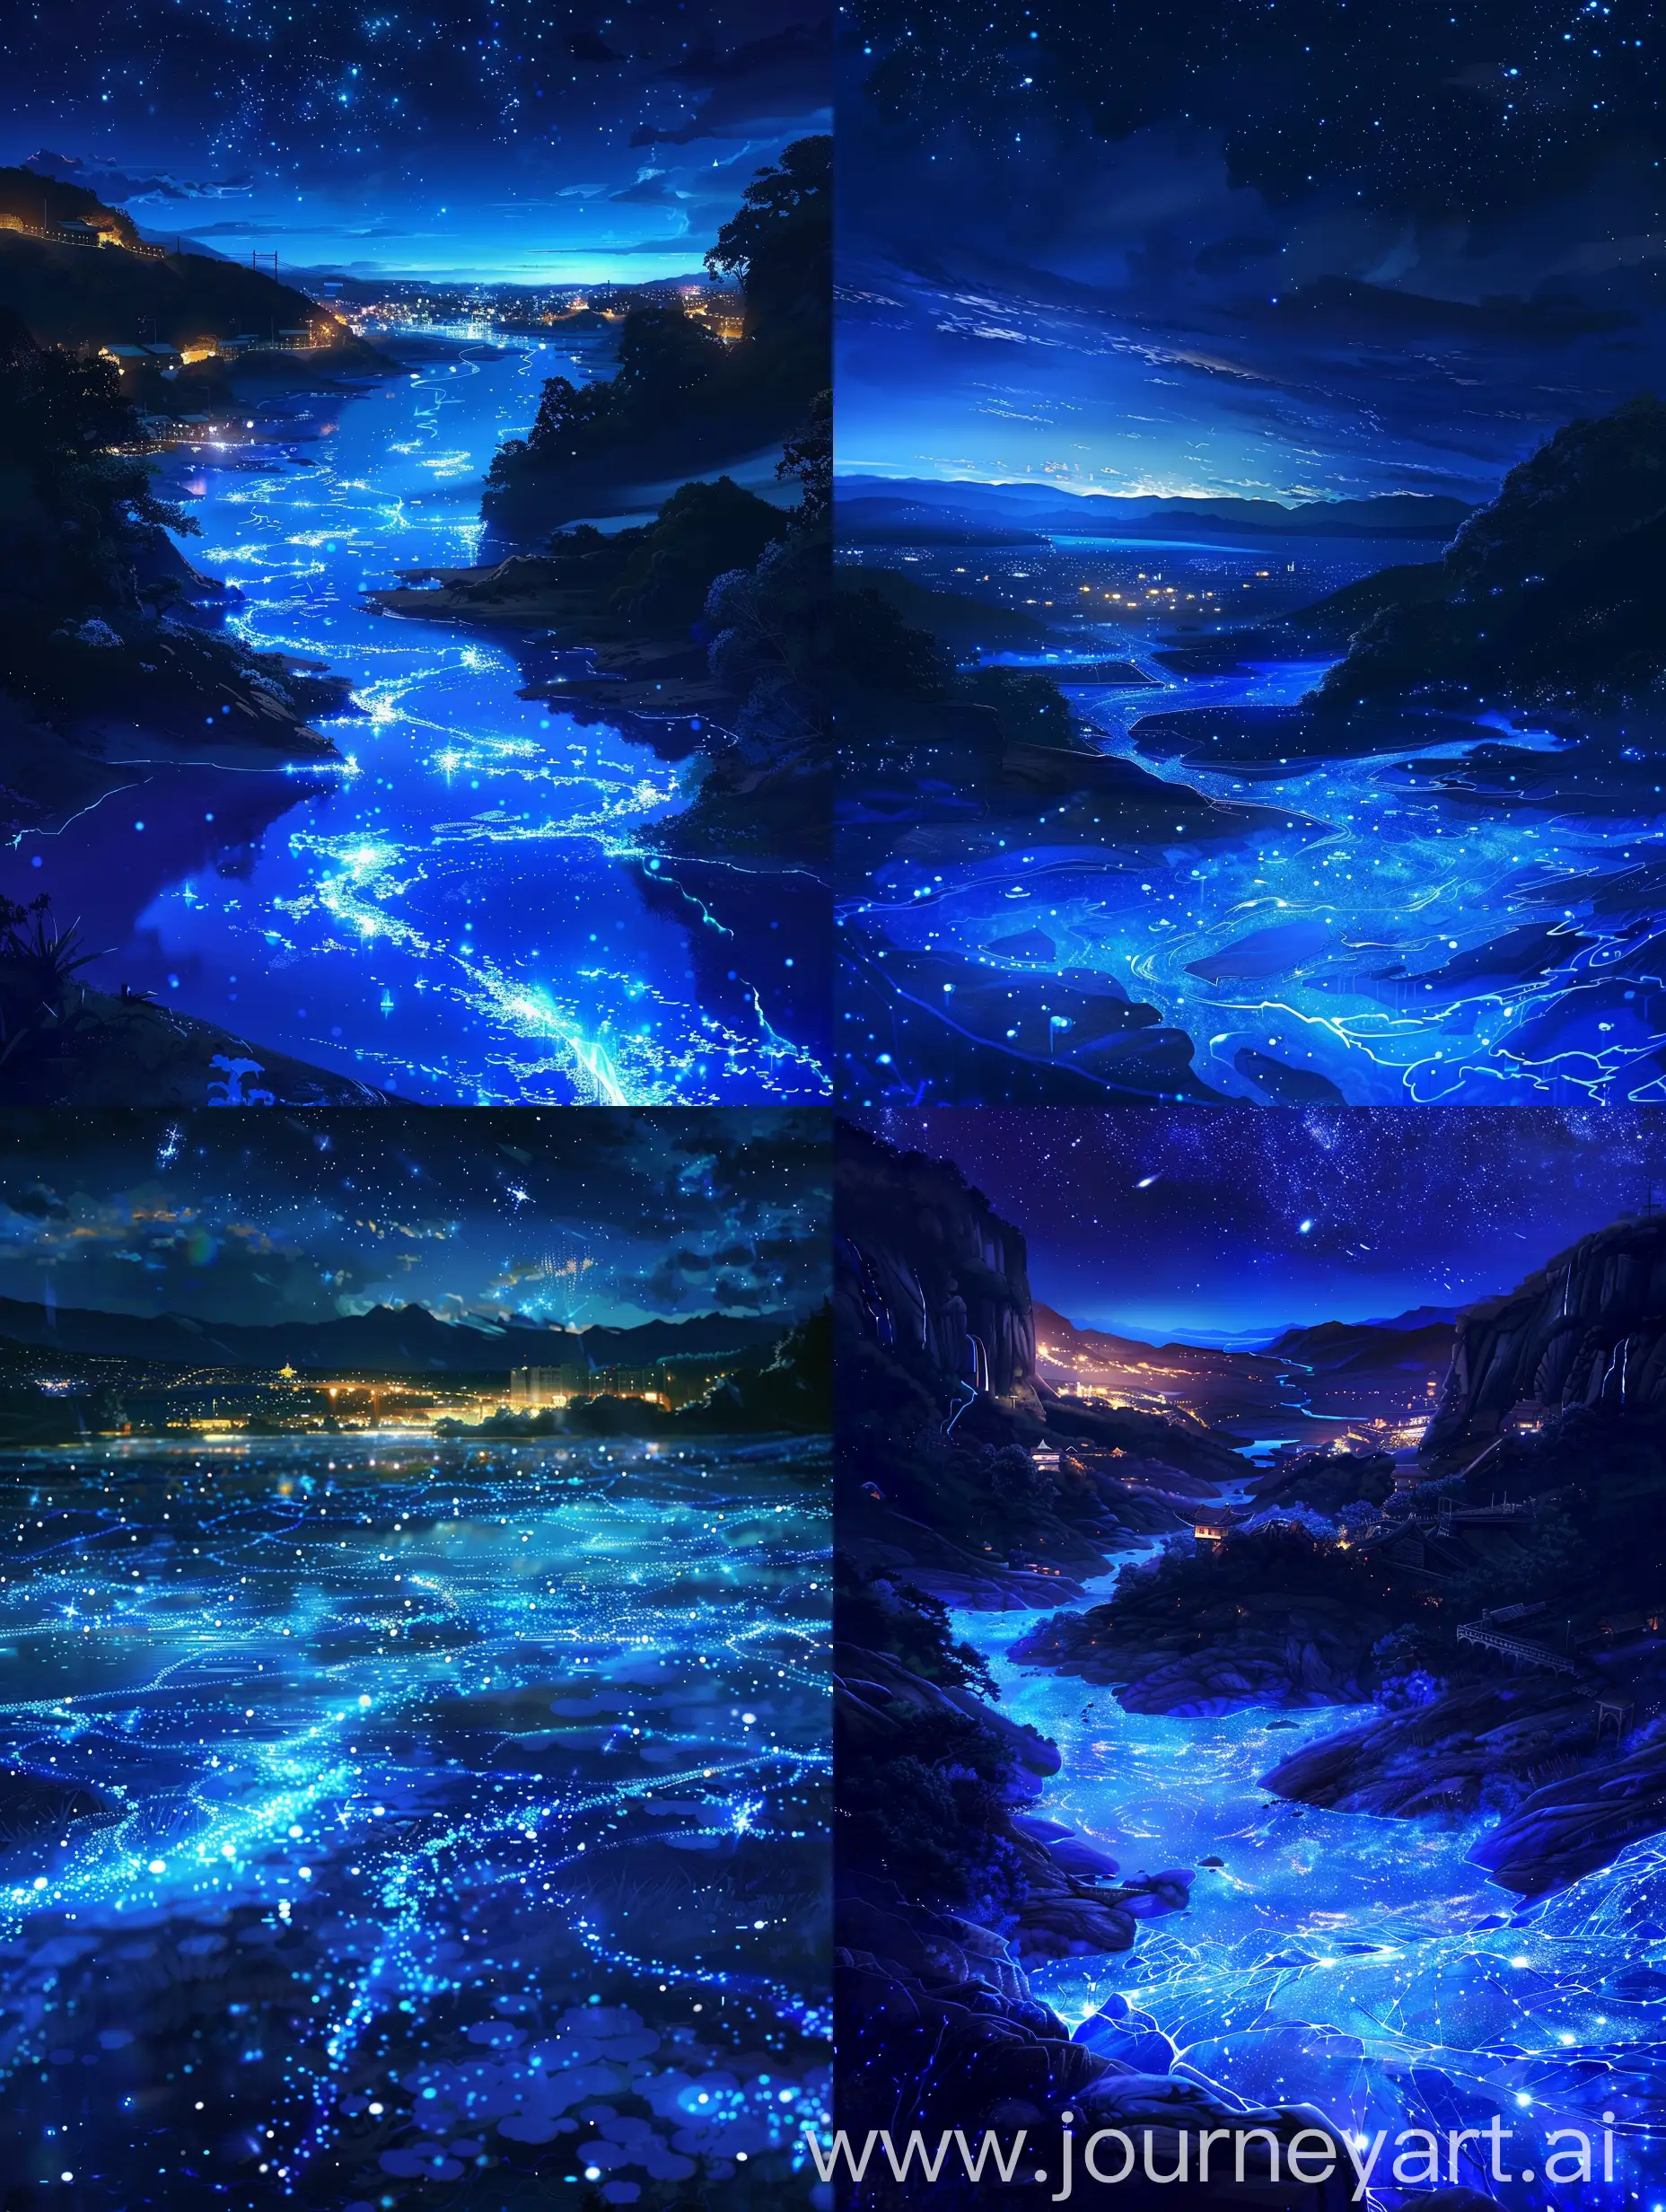 Anime style,beautiful night,a breathtaking night scene, where the ground is alive with a magical blue glow, reminiscent of a star-studded sky resting upon the earth. This natural spectacle is beautifully contrasted by the distant lights from buildings and structures, creating a striking balance between nature’s bioluminescence and human-made luminosity. The dark expanse of the night sky above further enhances this interplay of light, crafting an enchanting atmosphere that seems to blur the lines between the terrestrial and the celestial. It’s a moment where the wonders of nature and the achievements of civilization coexist in harmony, offering a glimpse into the serene and the sublime.avoid distortion.